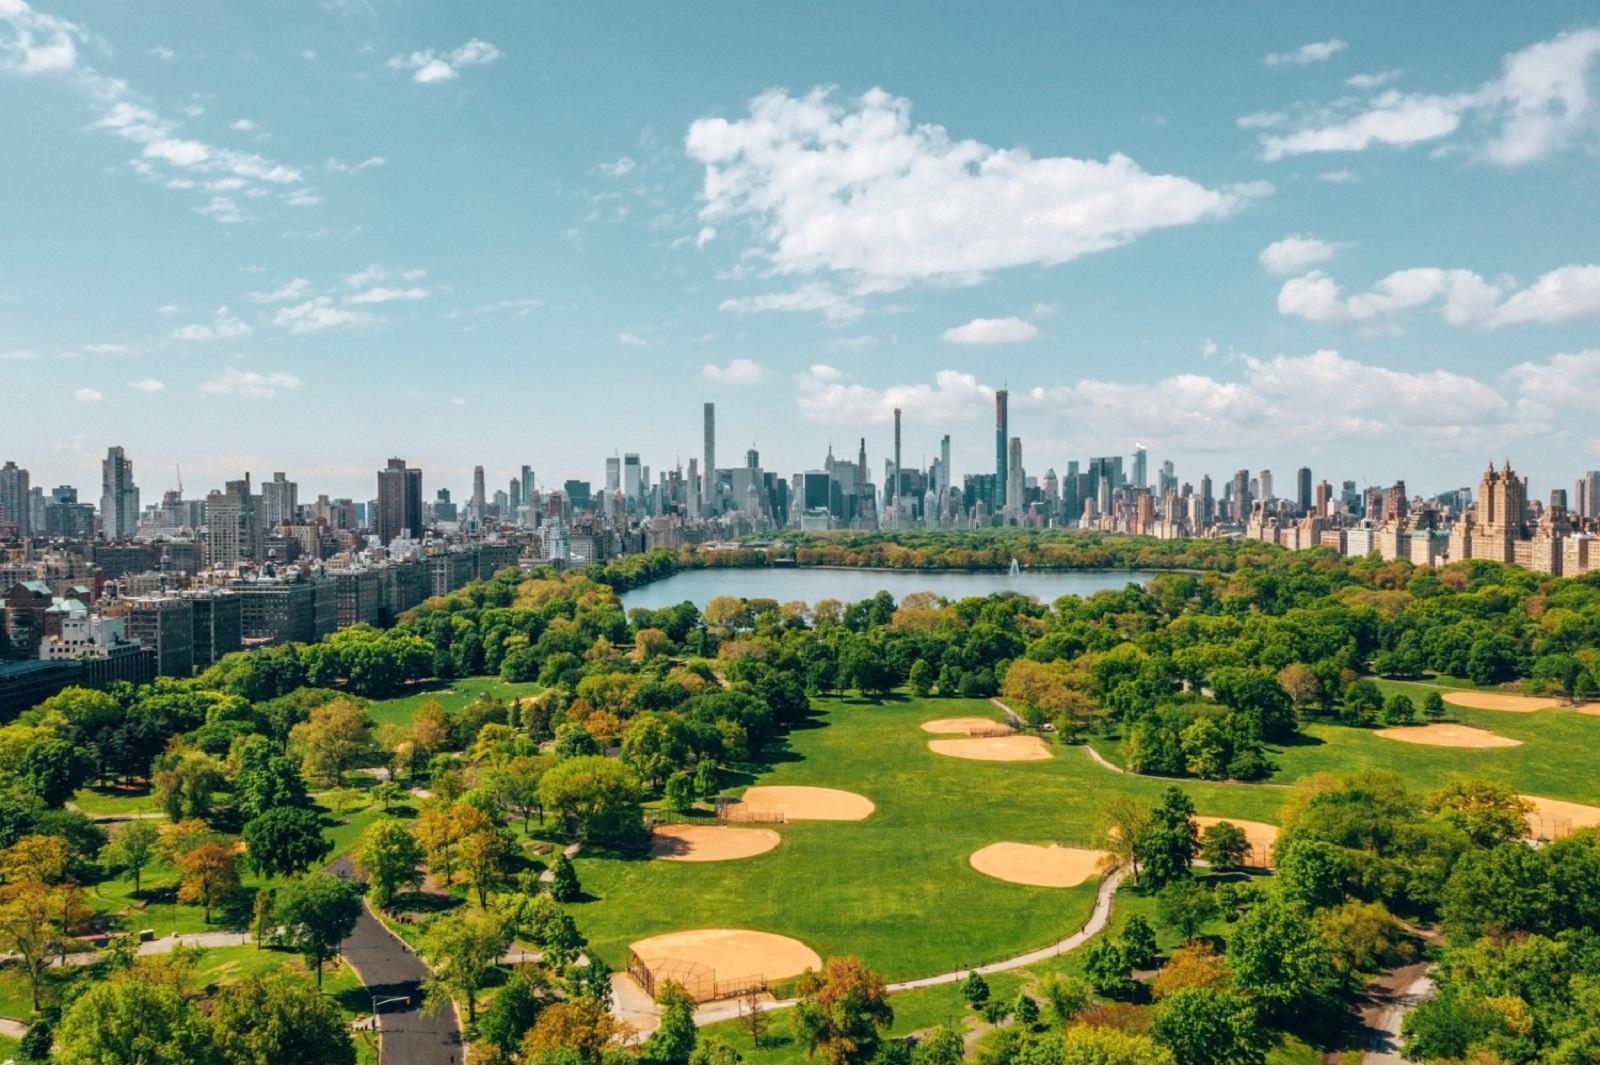 The Stunning Views of Central Park with the New York Skyline in the Background You Can Enjoy